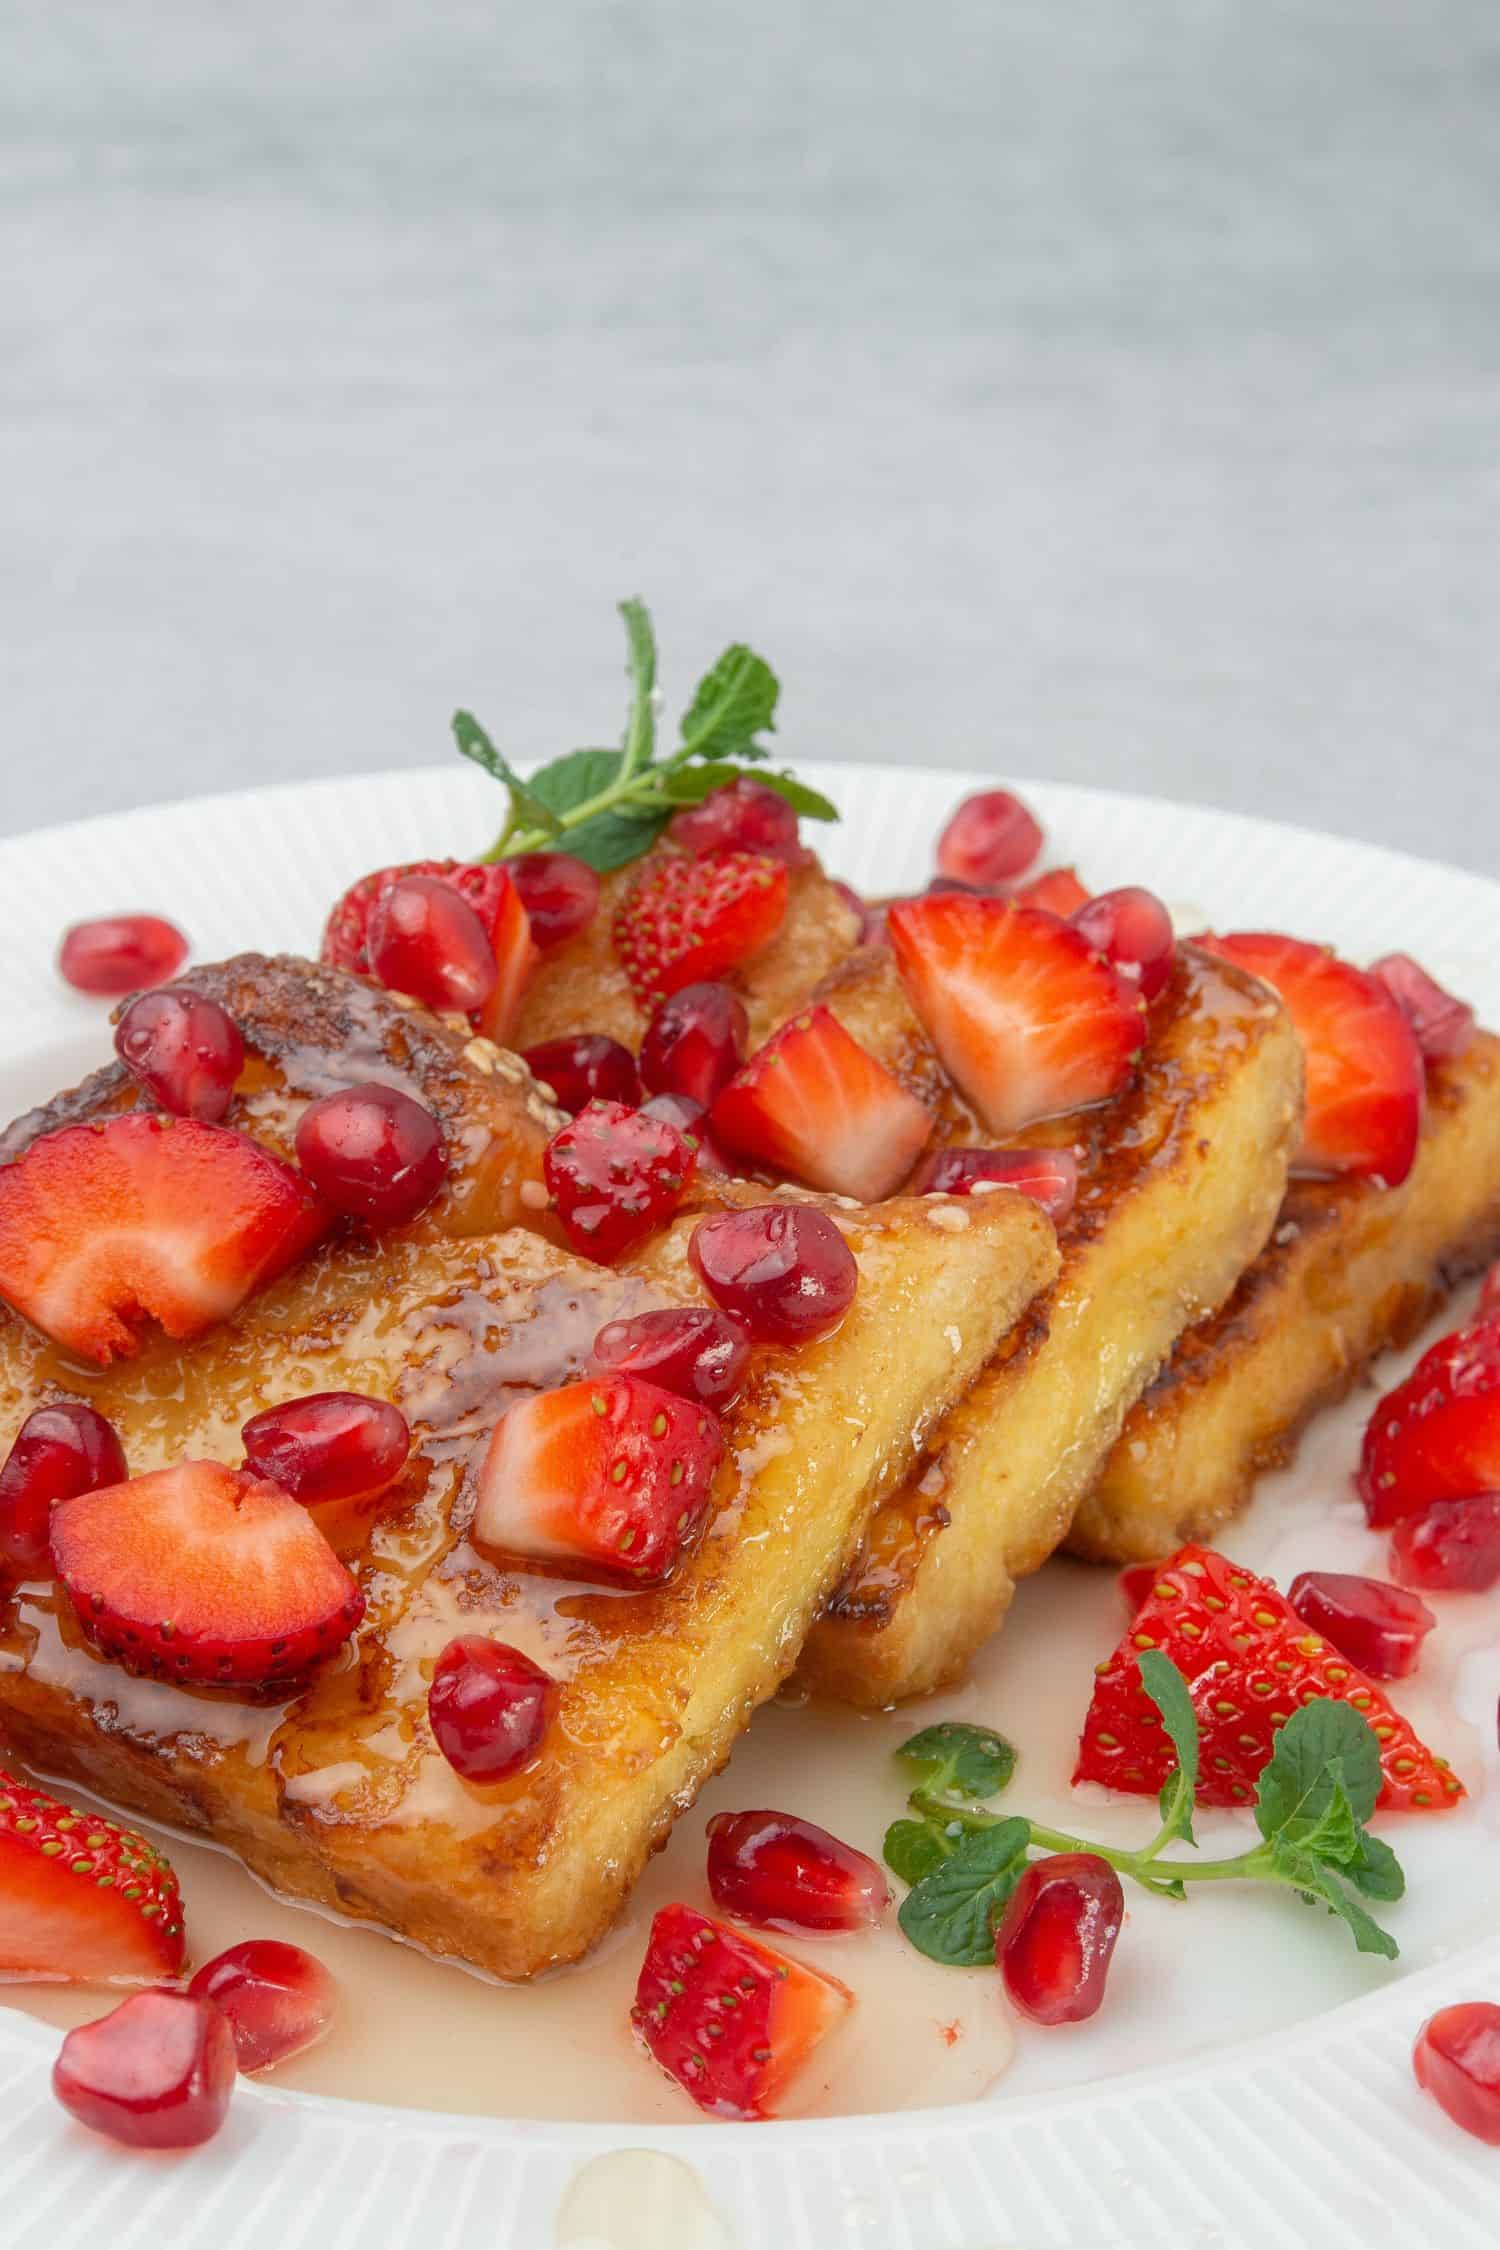 French toast with strawberries on a plate.